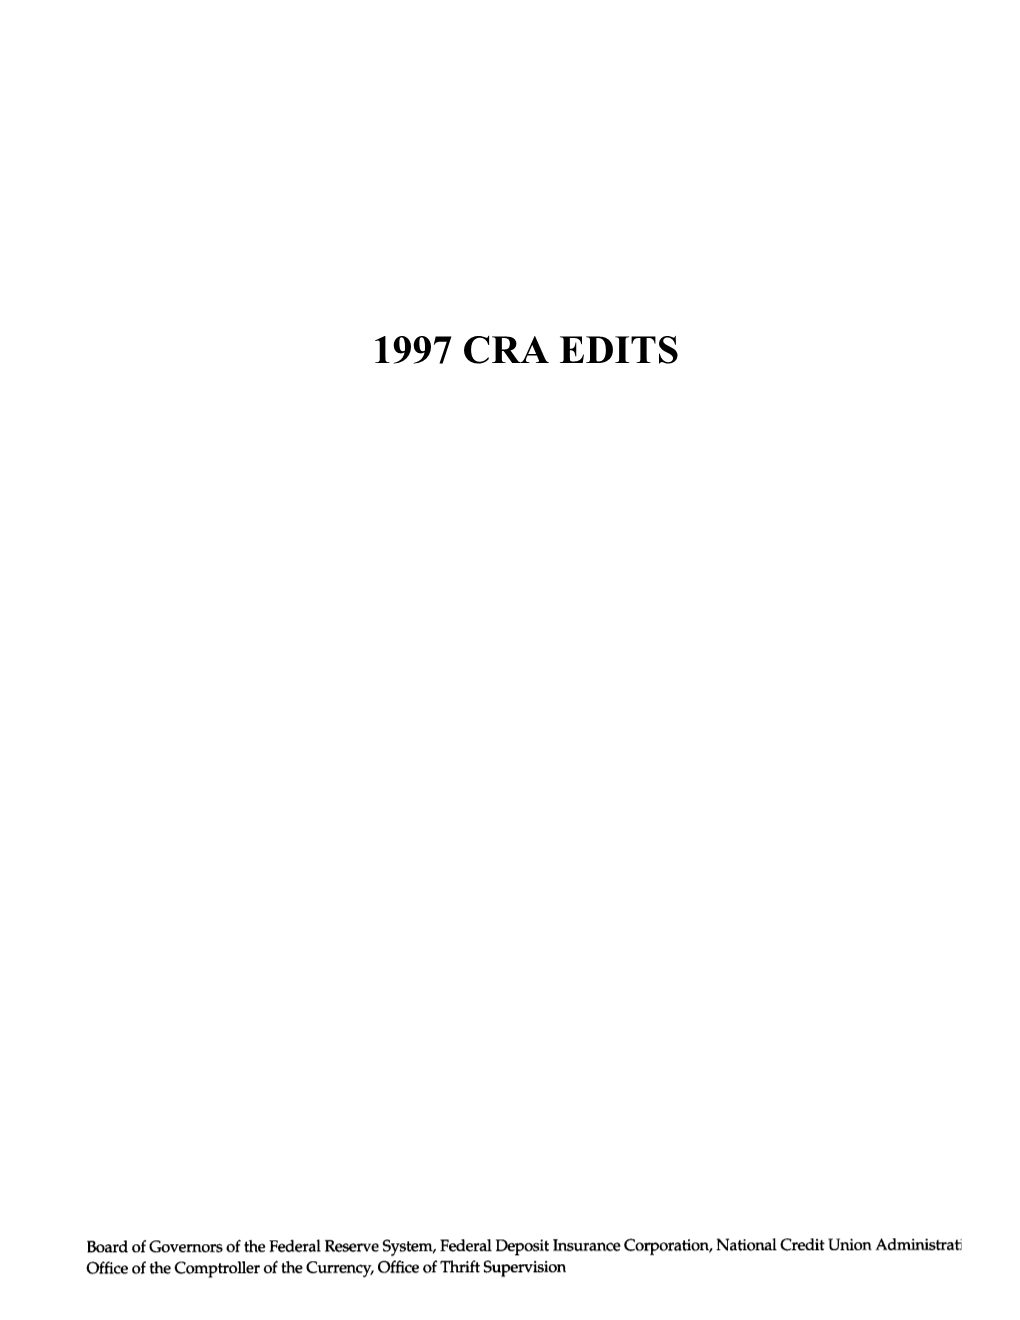 Quick Reference to Understanding Cra Edits